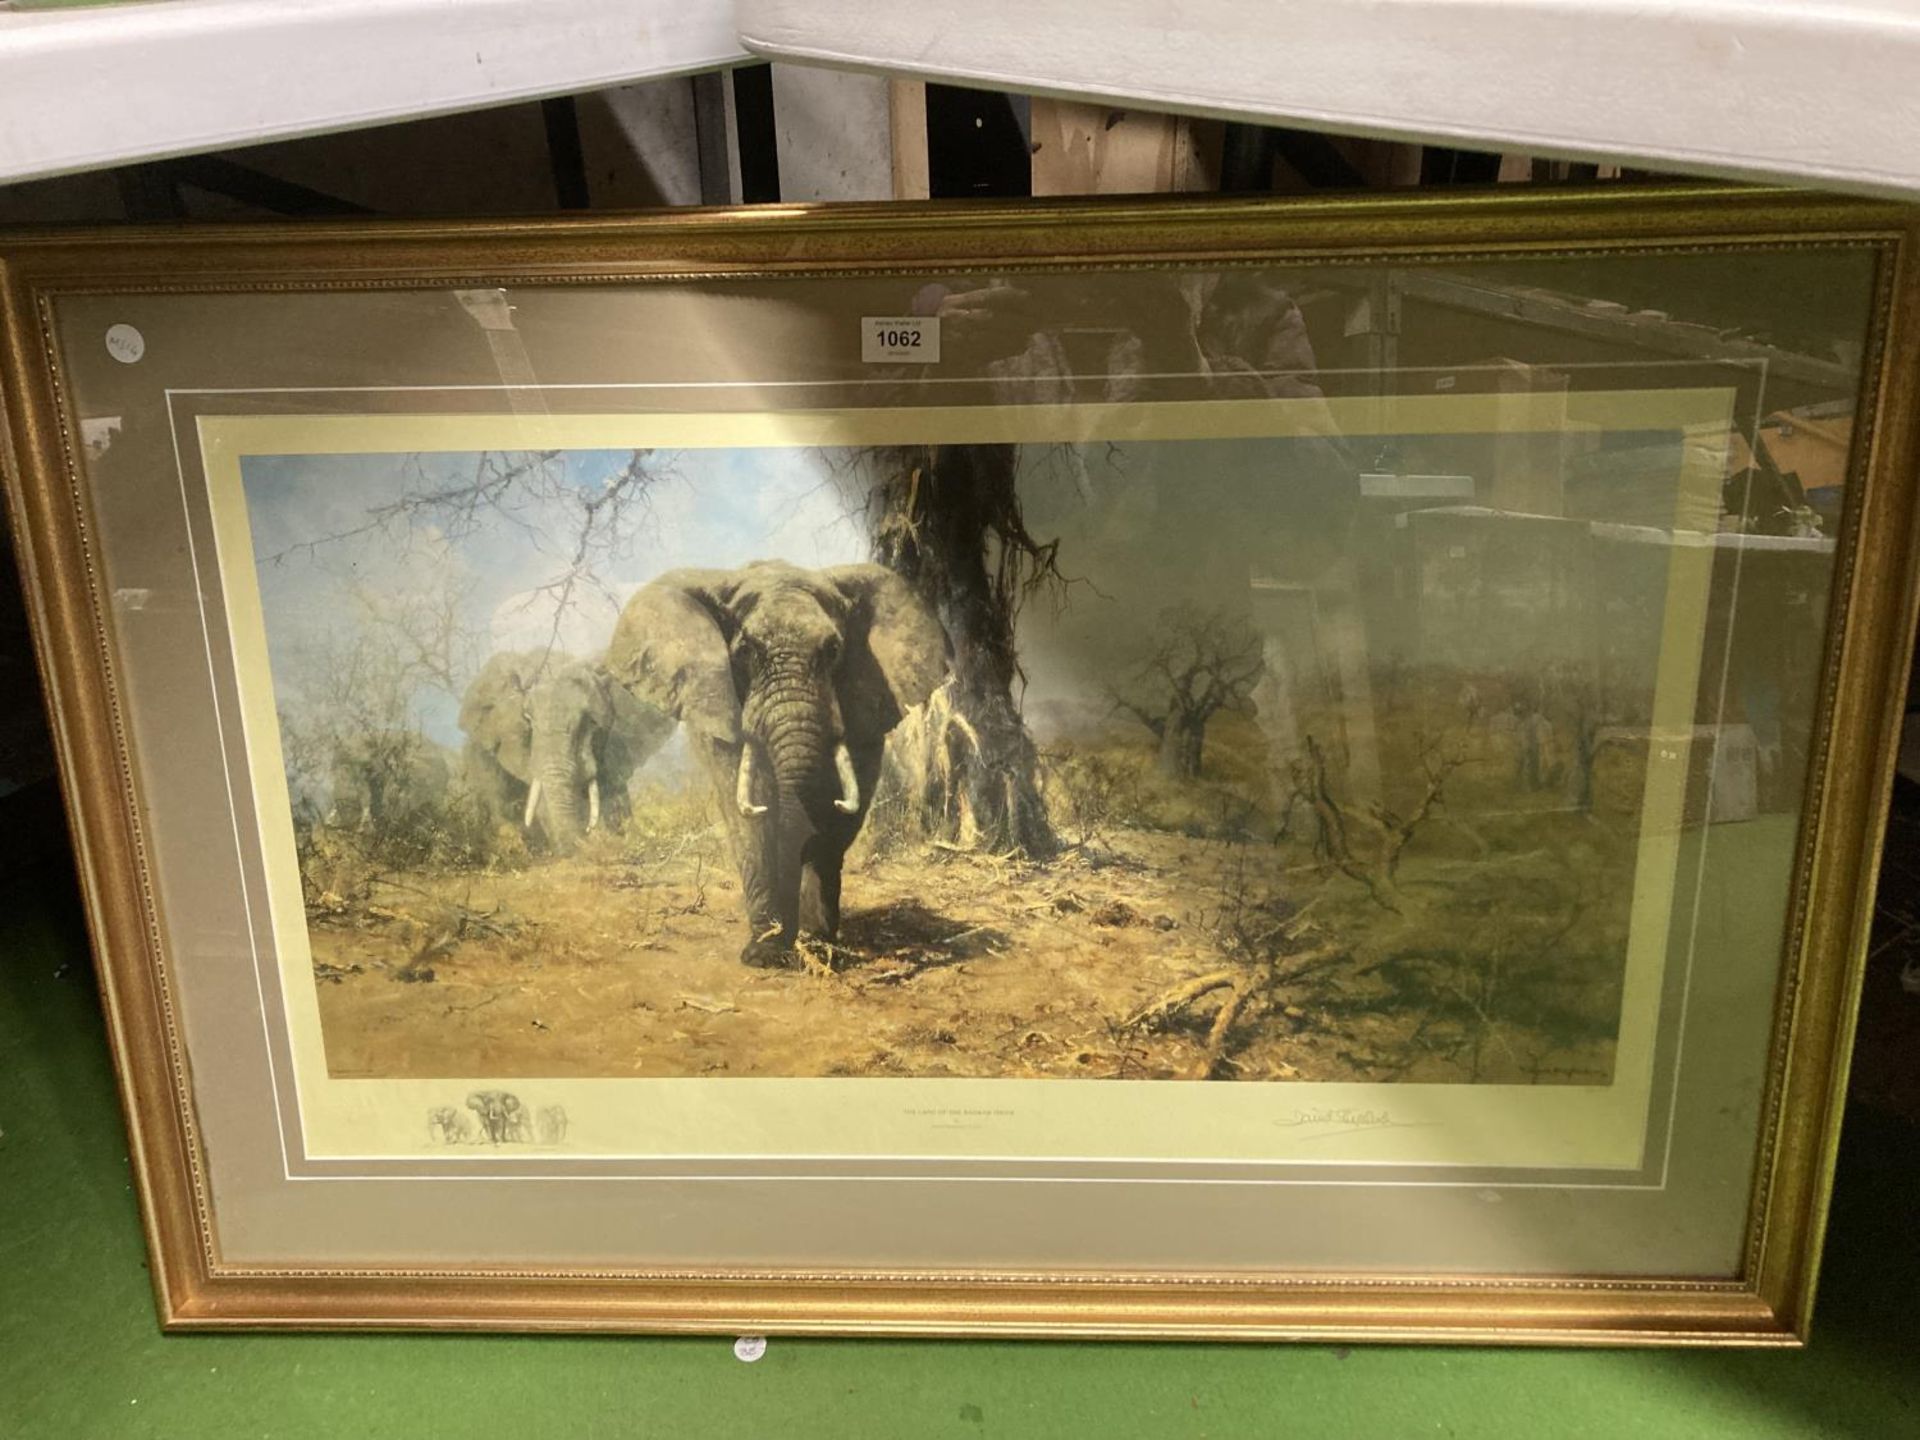 A DAVID SHEPHERD SIGNED LIMITED EDITION PRINT 'THE LAND OF THE BAOBAB TREES', 95CM X 52CM